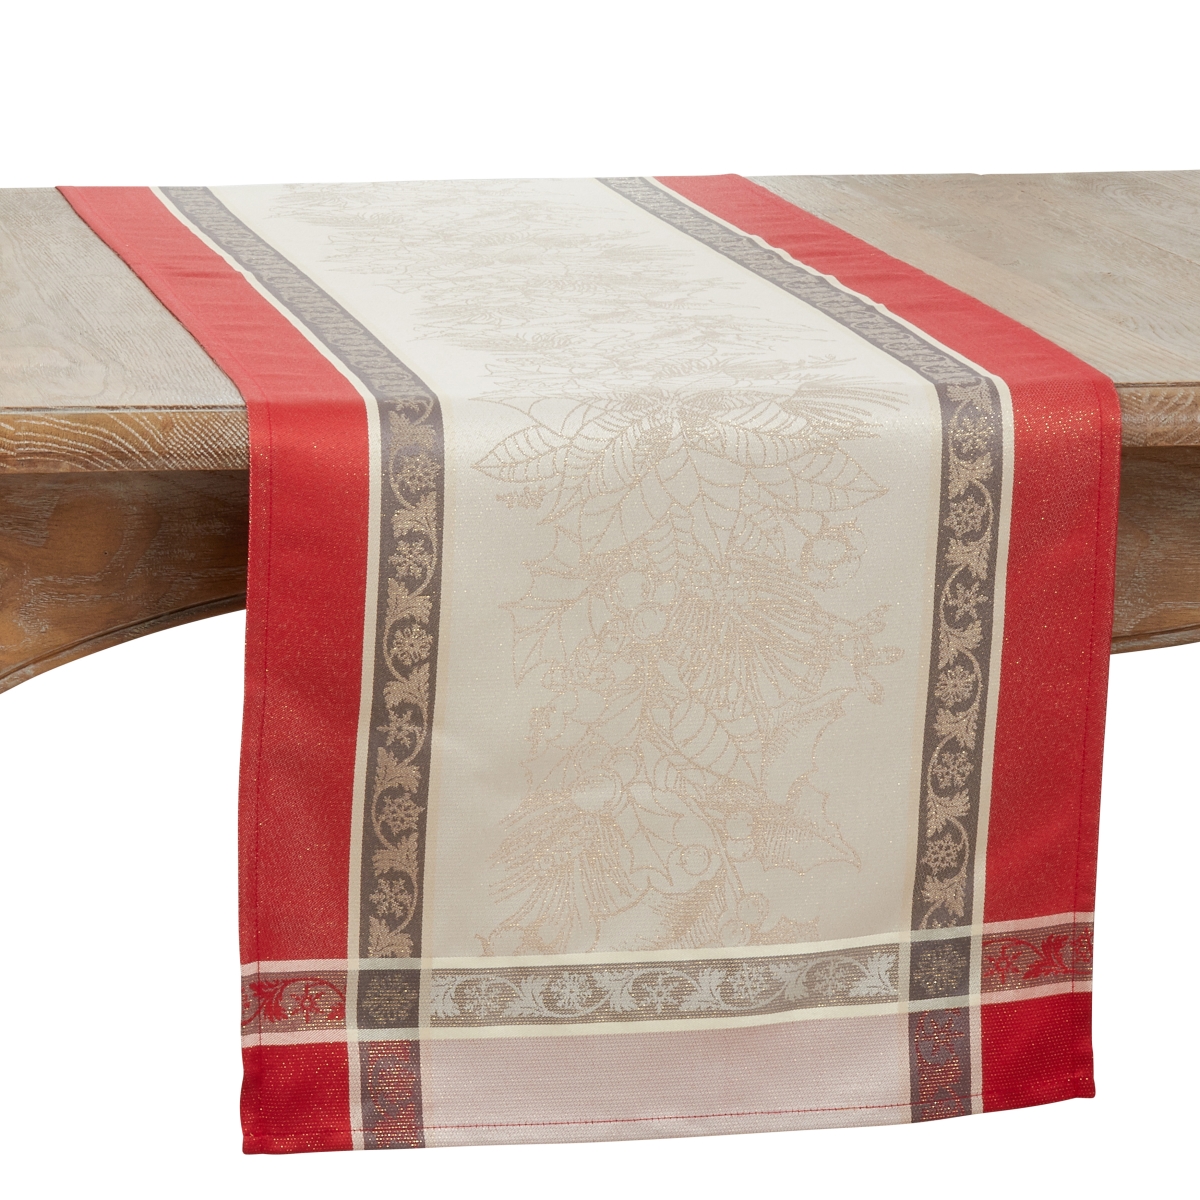 Picture of Saro Lifestyle 2487.R1654B 16 x 54 in. Jacquard Christmas Oblong Table Runner, Red